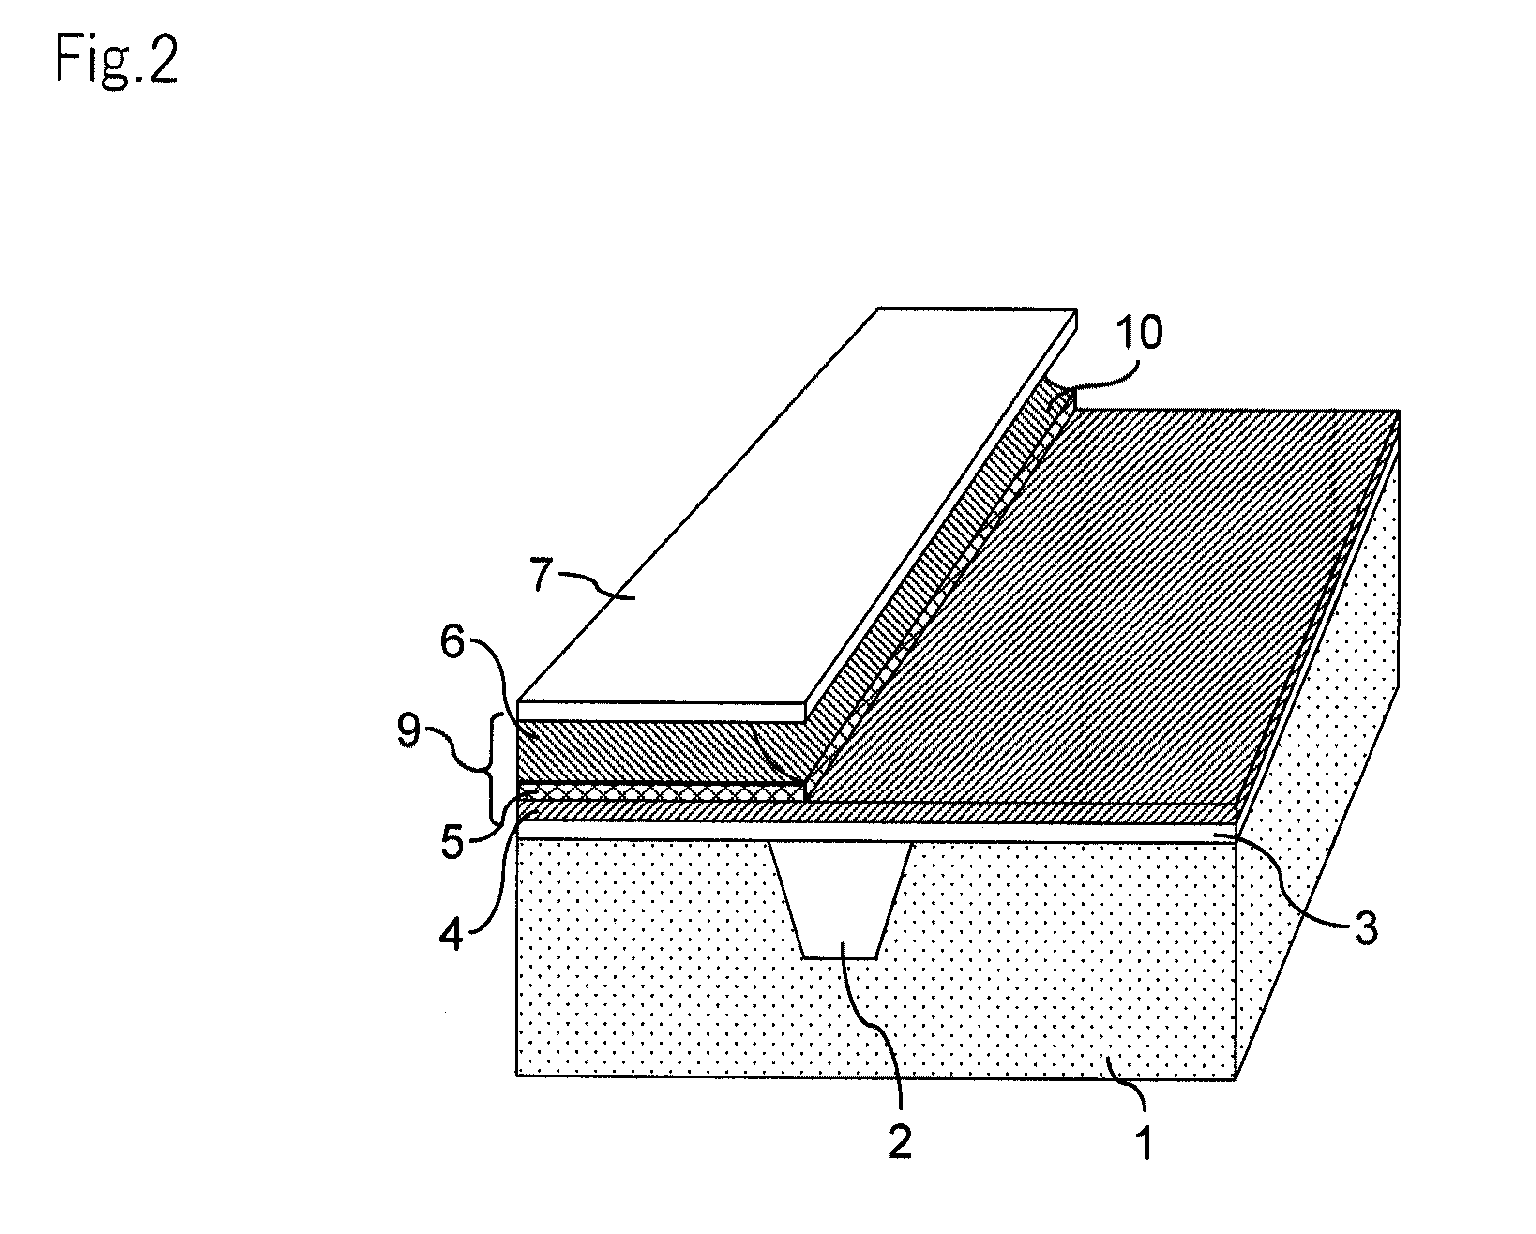 Border between semiconductor transistors with different gate structures